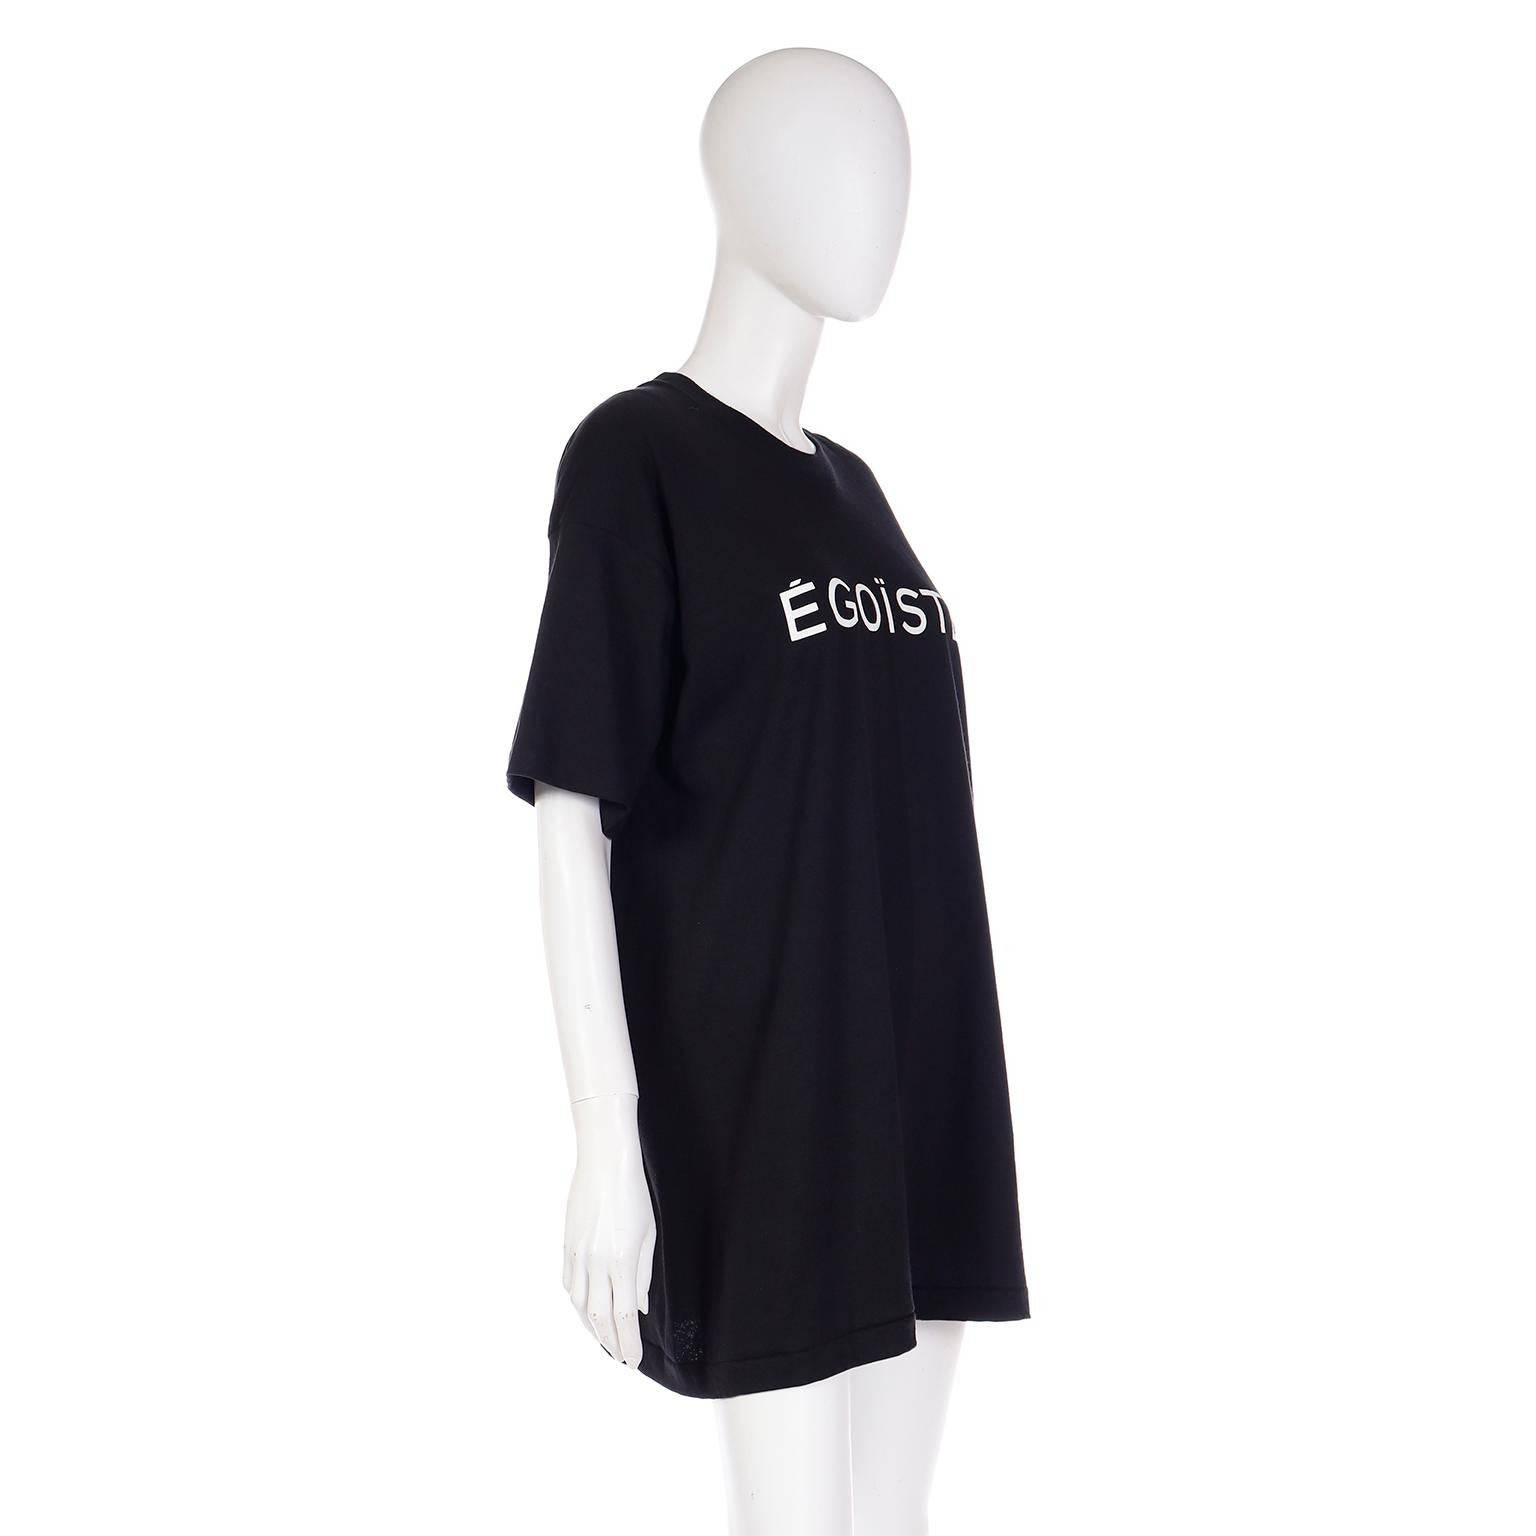 Vintage 1990 Chanel Egoiste Black & White Cotton Campaign Promotional Tee Shirt In Excellent Condition For Sale In Portland, OR